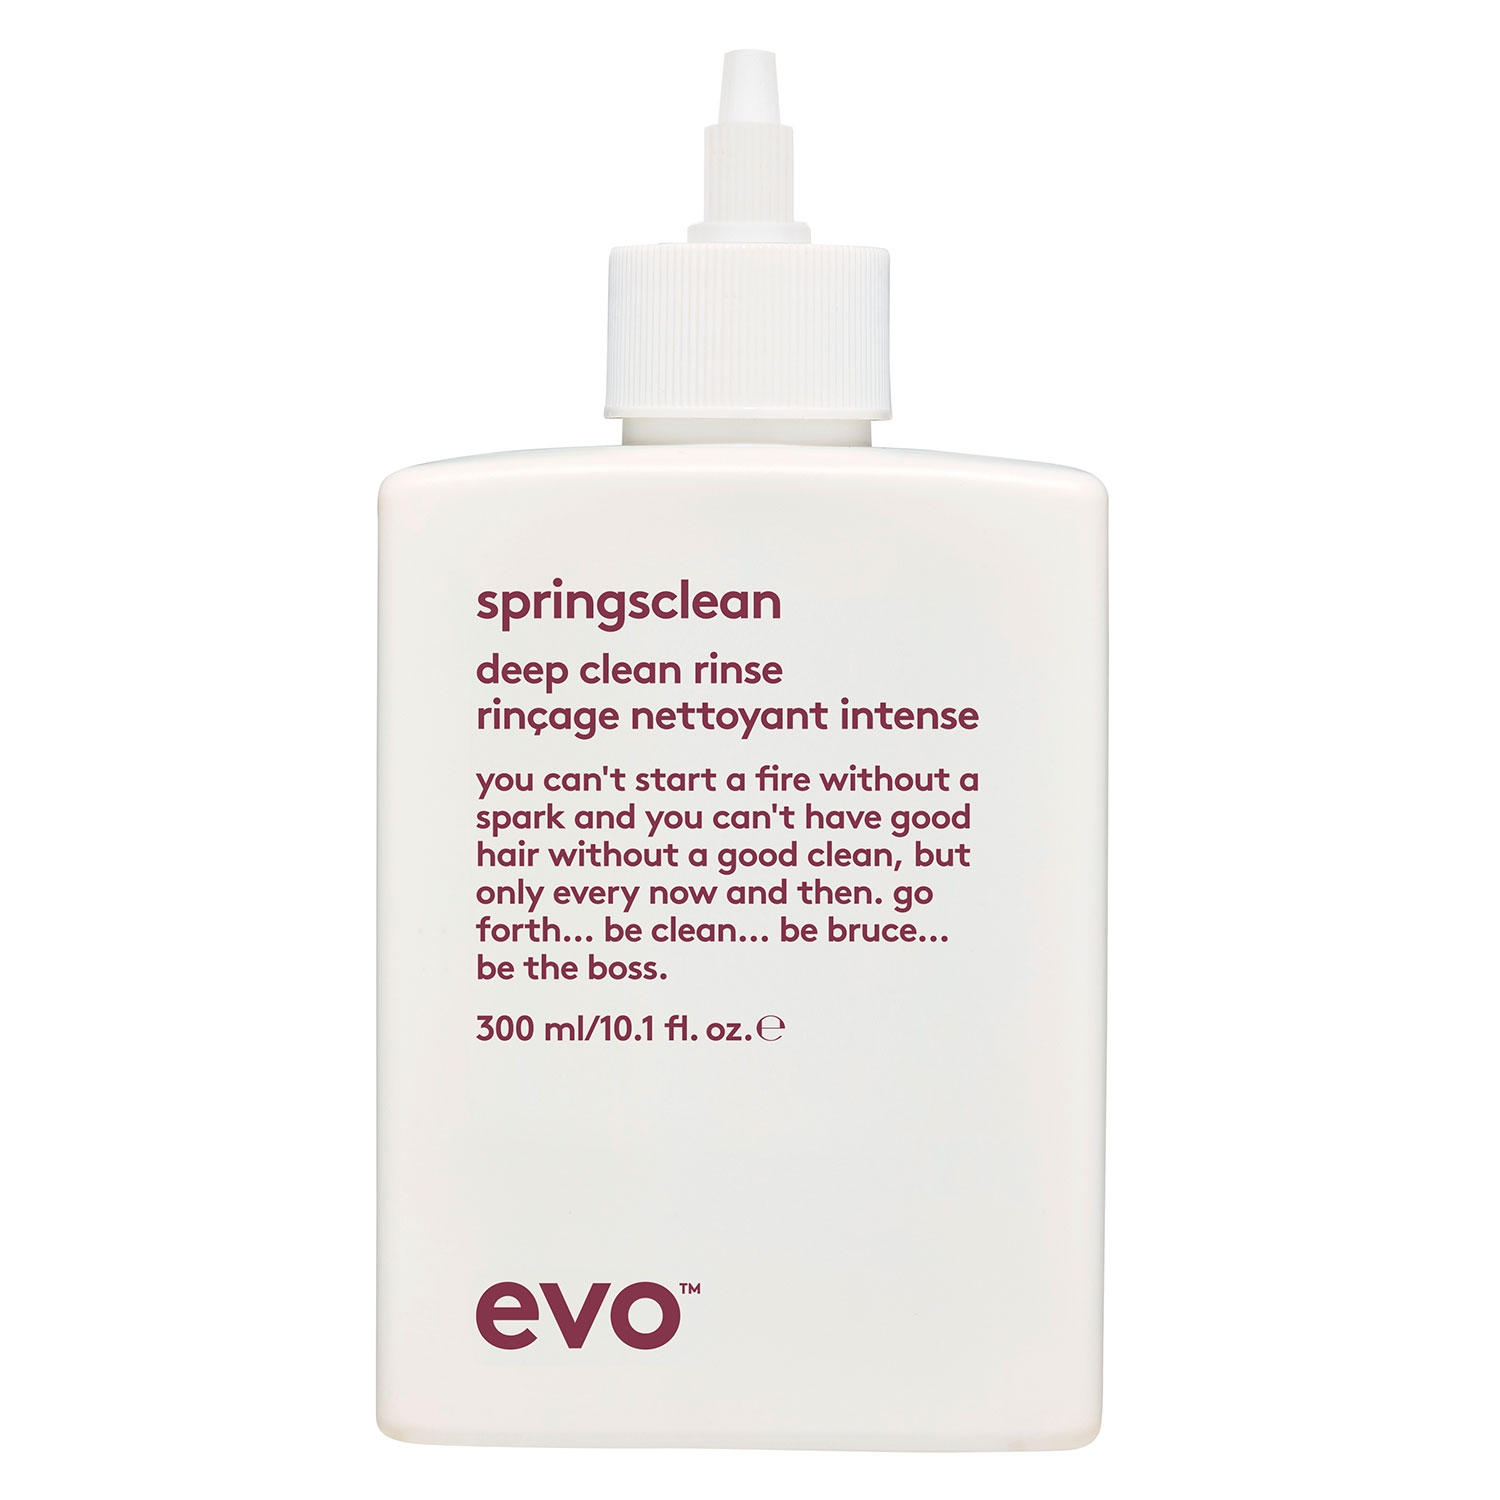 Product image from evo curl - Springsclean Deep Clean Rinse